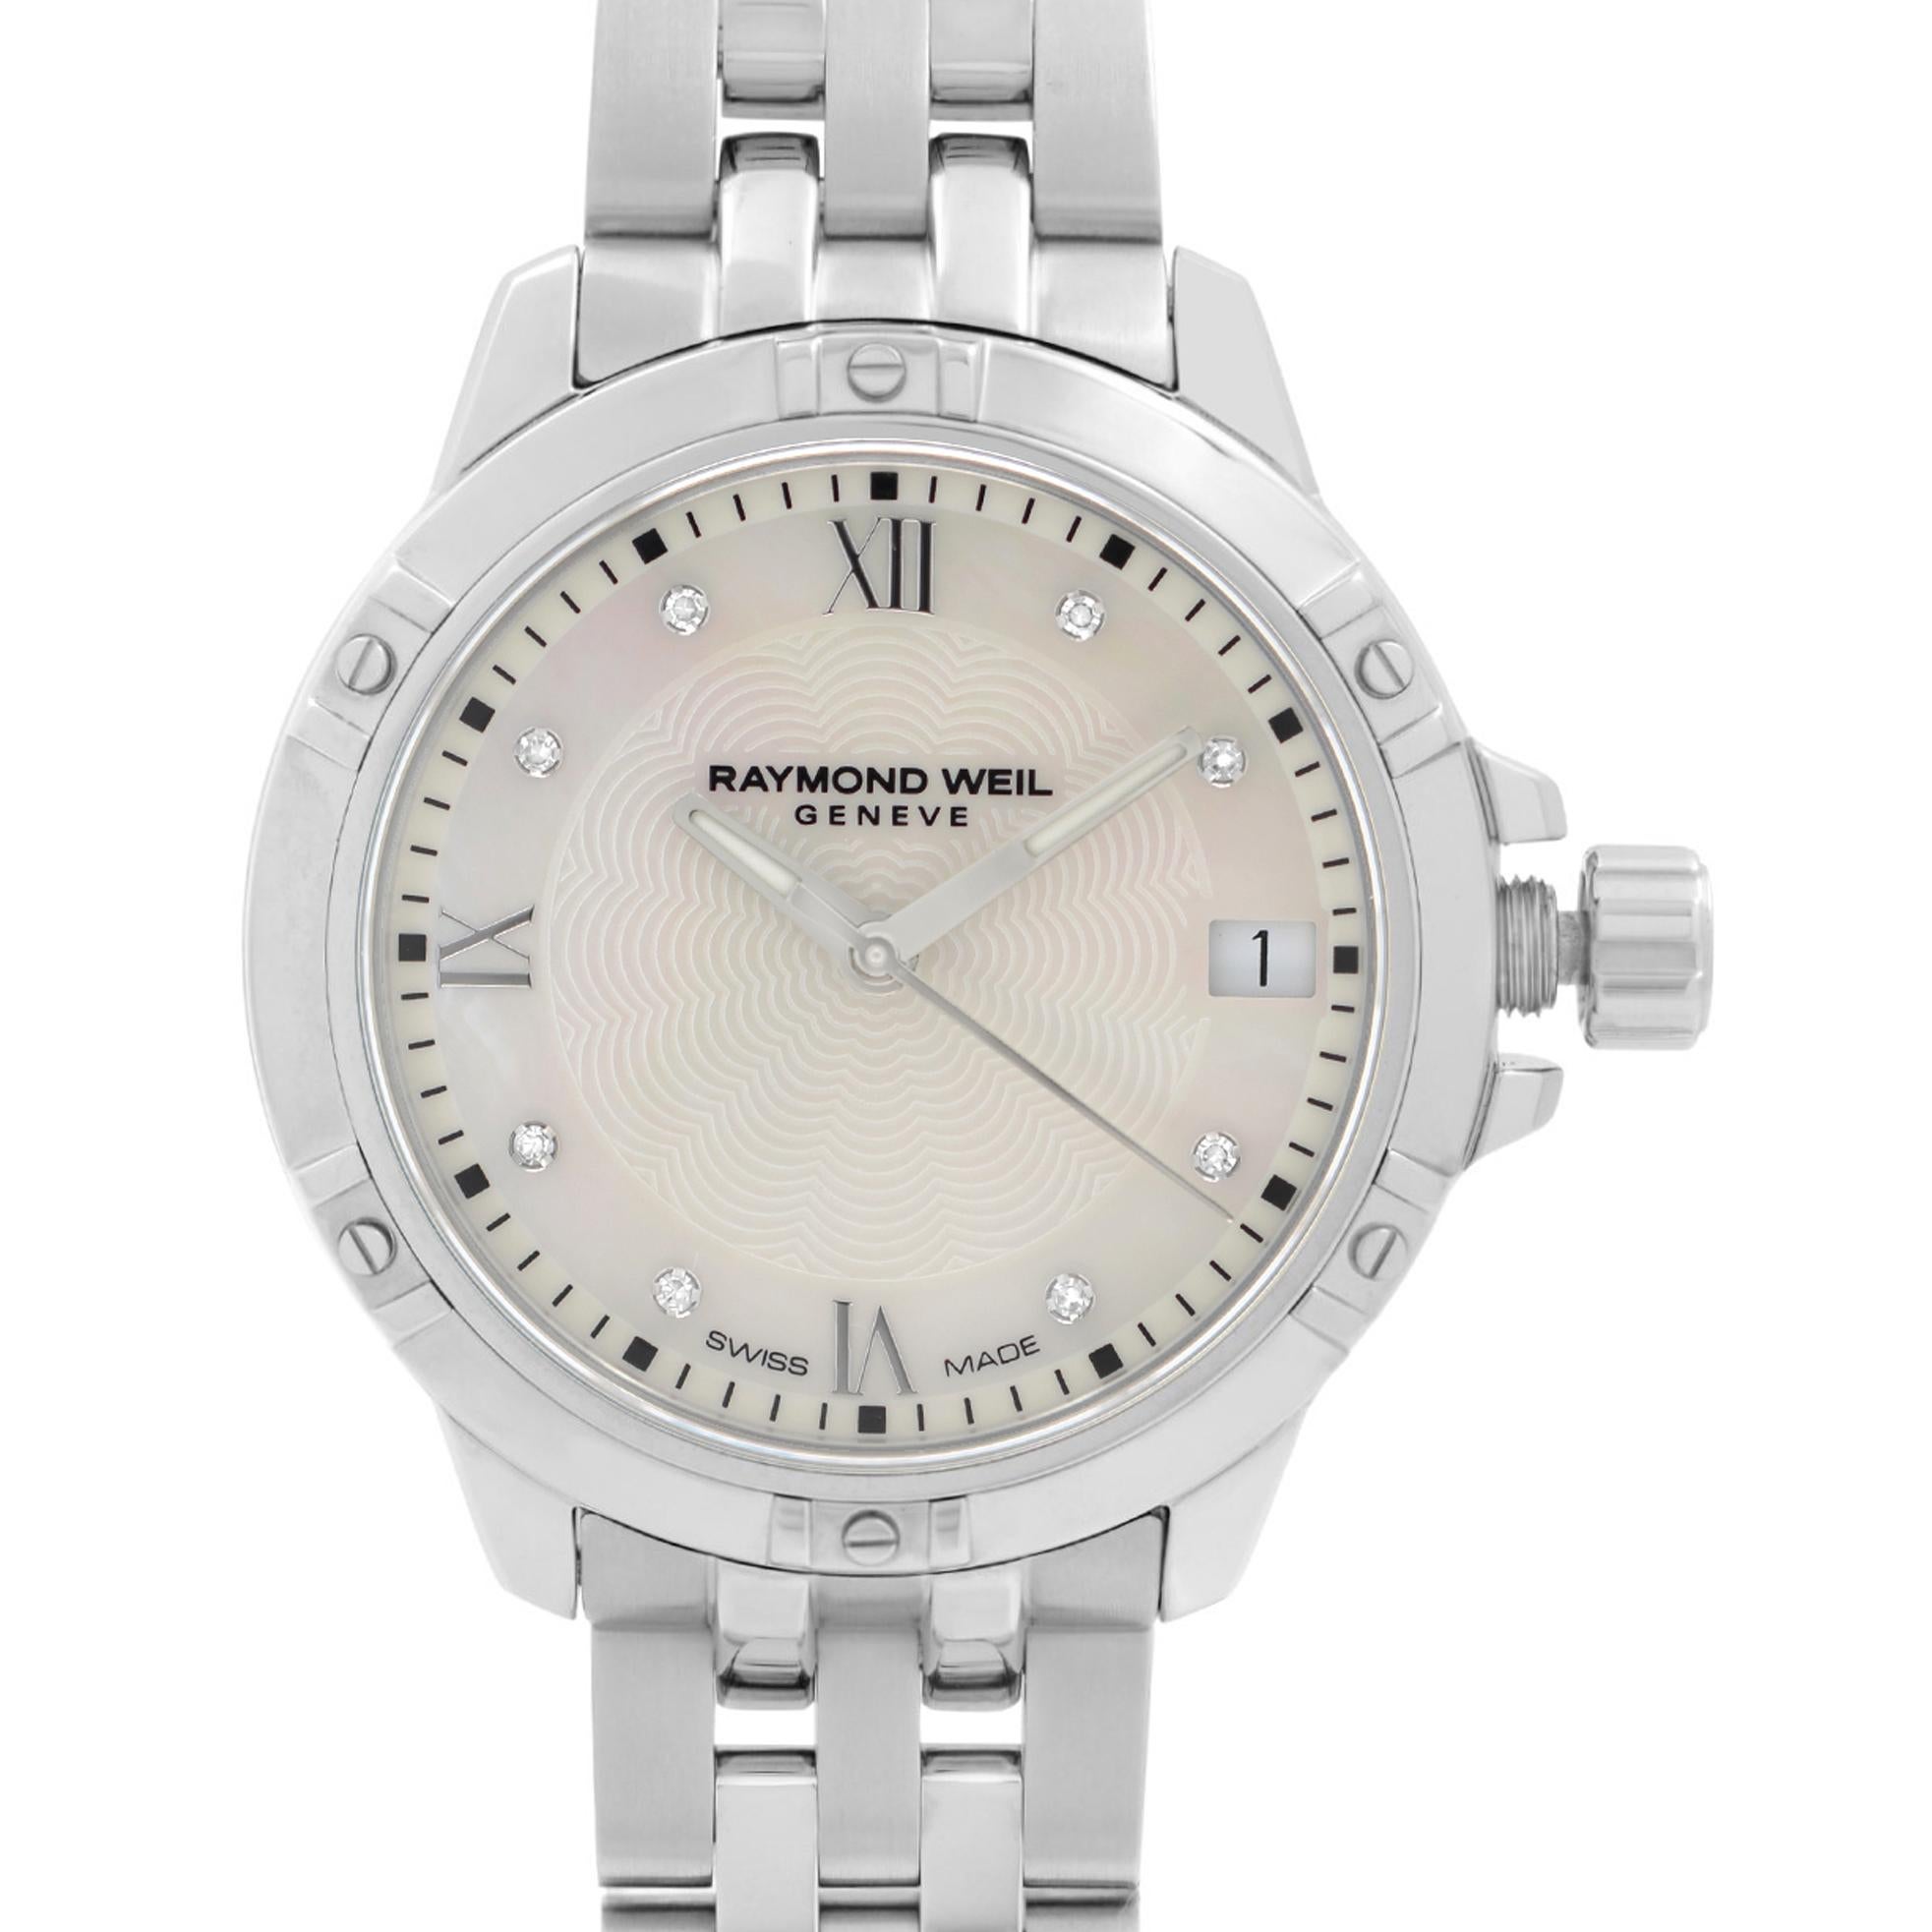 The watch has never been worn or used. Original box and papers are included. 


Details:
MSRP 1150
Brand RAYMOND WEIL
Department Women
Model Number 5960-ST-00995
Country/Region of Manufacture Switzerland
Model Raymond Weil Tango
Style